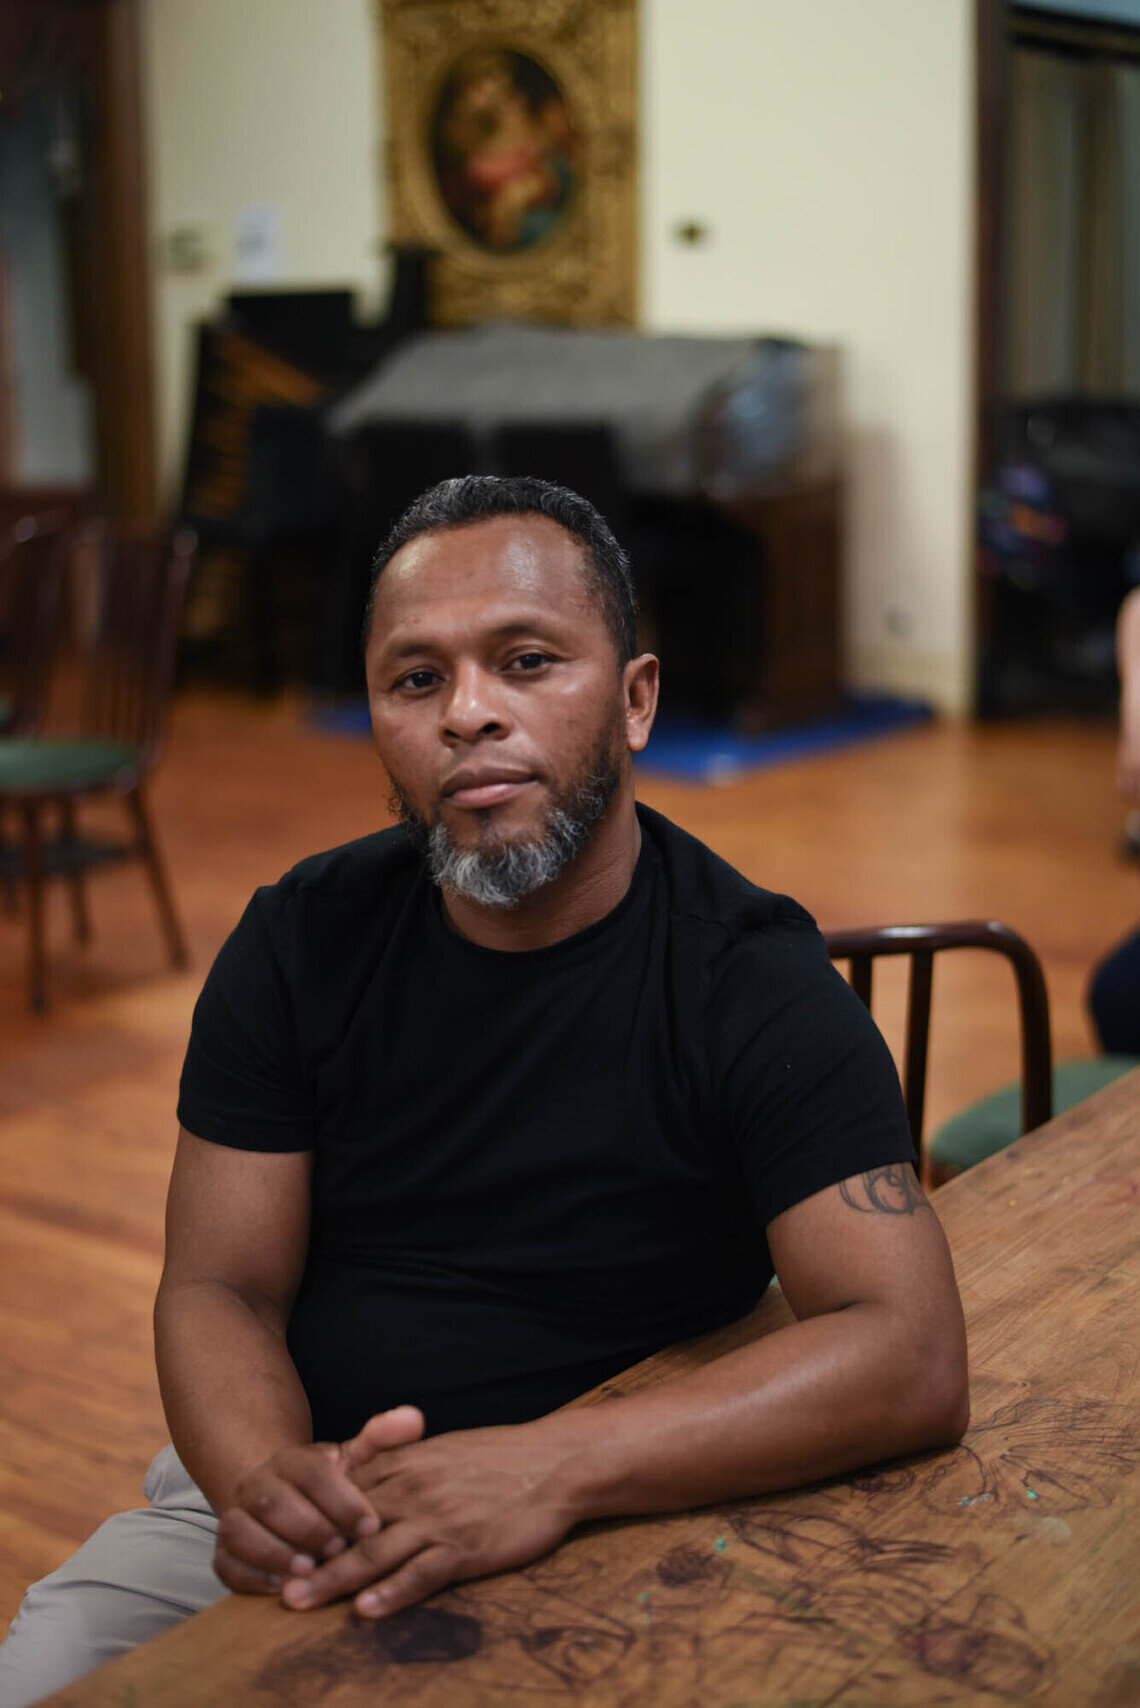 A Venezuelan man with medium-dark skin tone, short hair and a graying goatee sits at a table with his hands folded. He wears a black t-shirt and light gray pants.